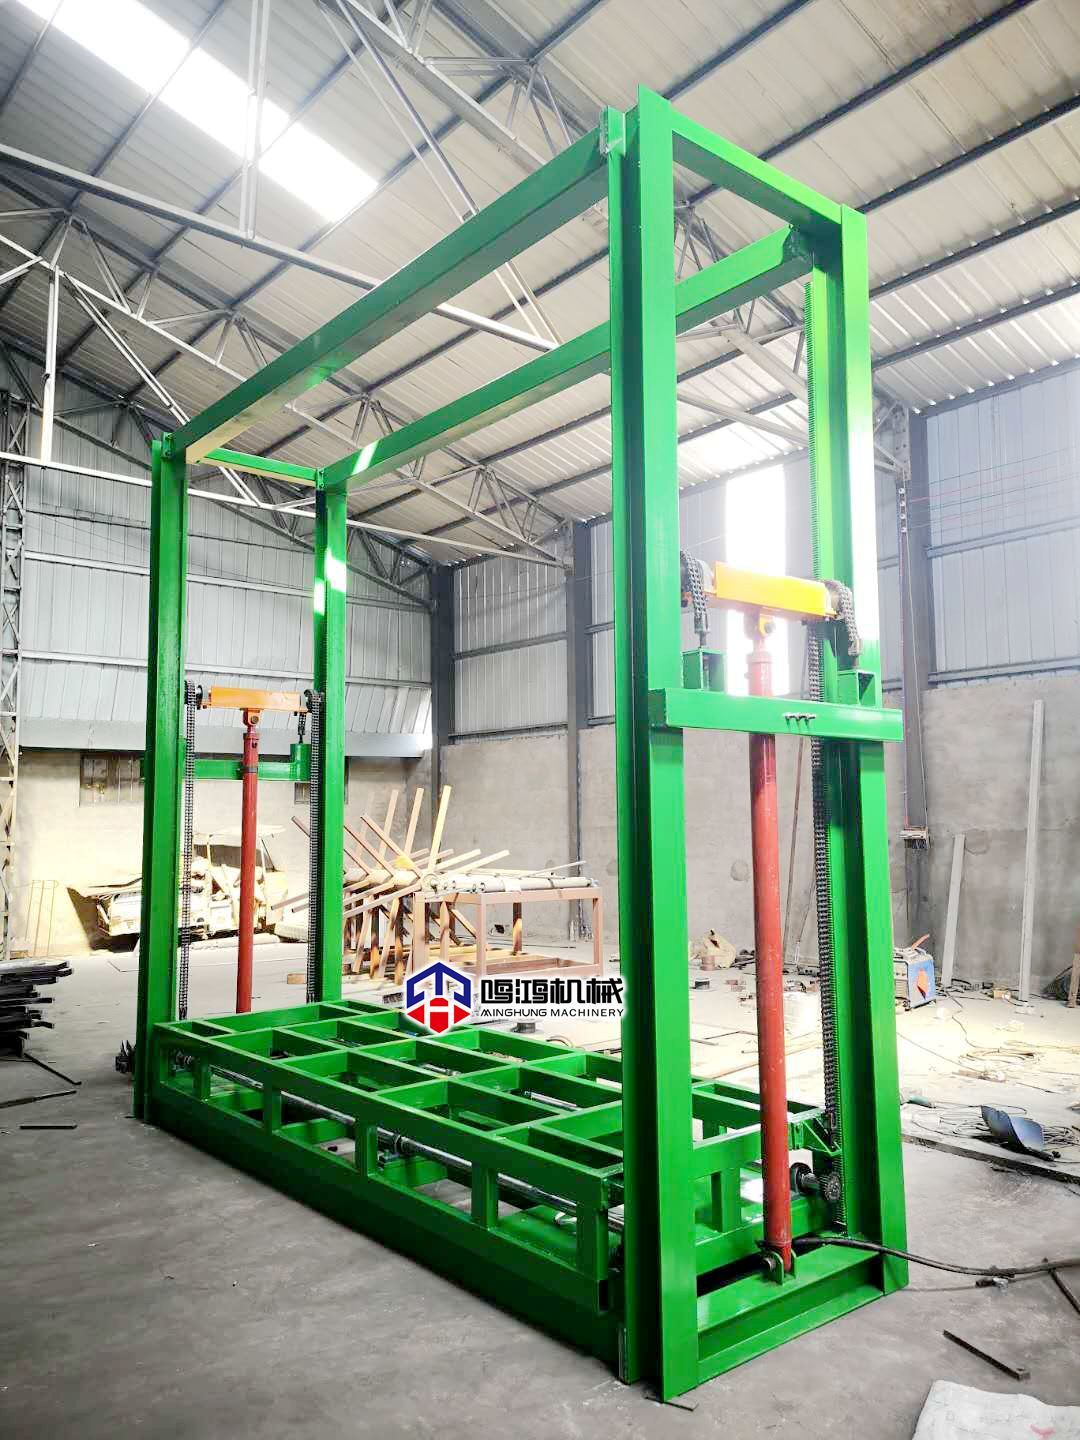 Lift Table for Plywood Press Machine